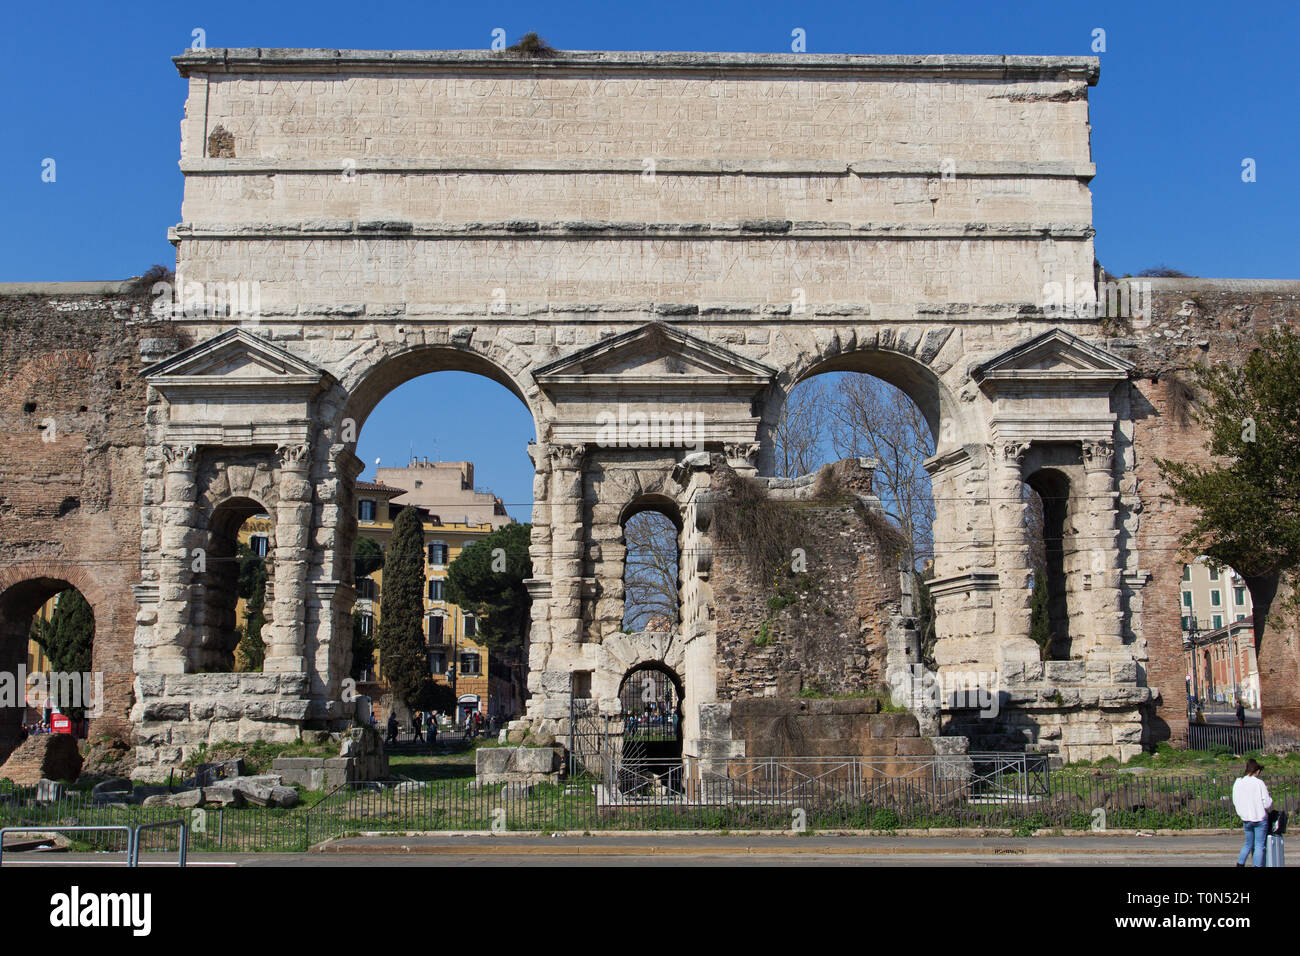 Porta Maggiore ('Larger Gate', built in 52 AD) is one of the eastern gates in the ancient and well-preserved 3rd-century AD Aurelian Walls of Rome. Stock Photo